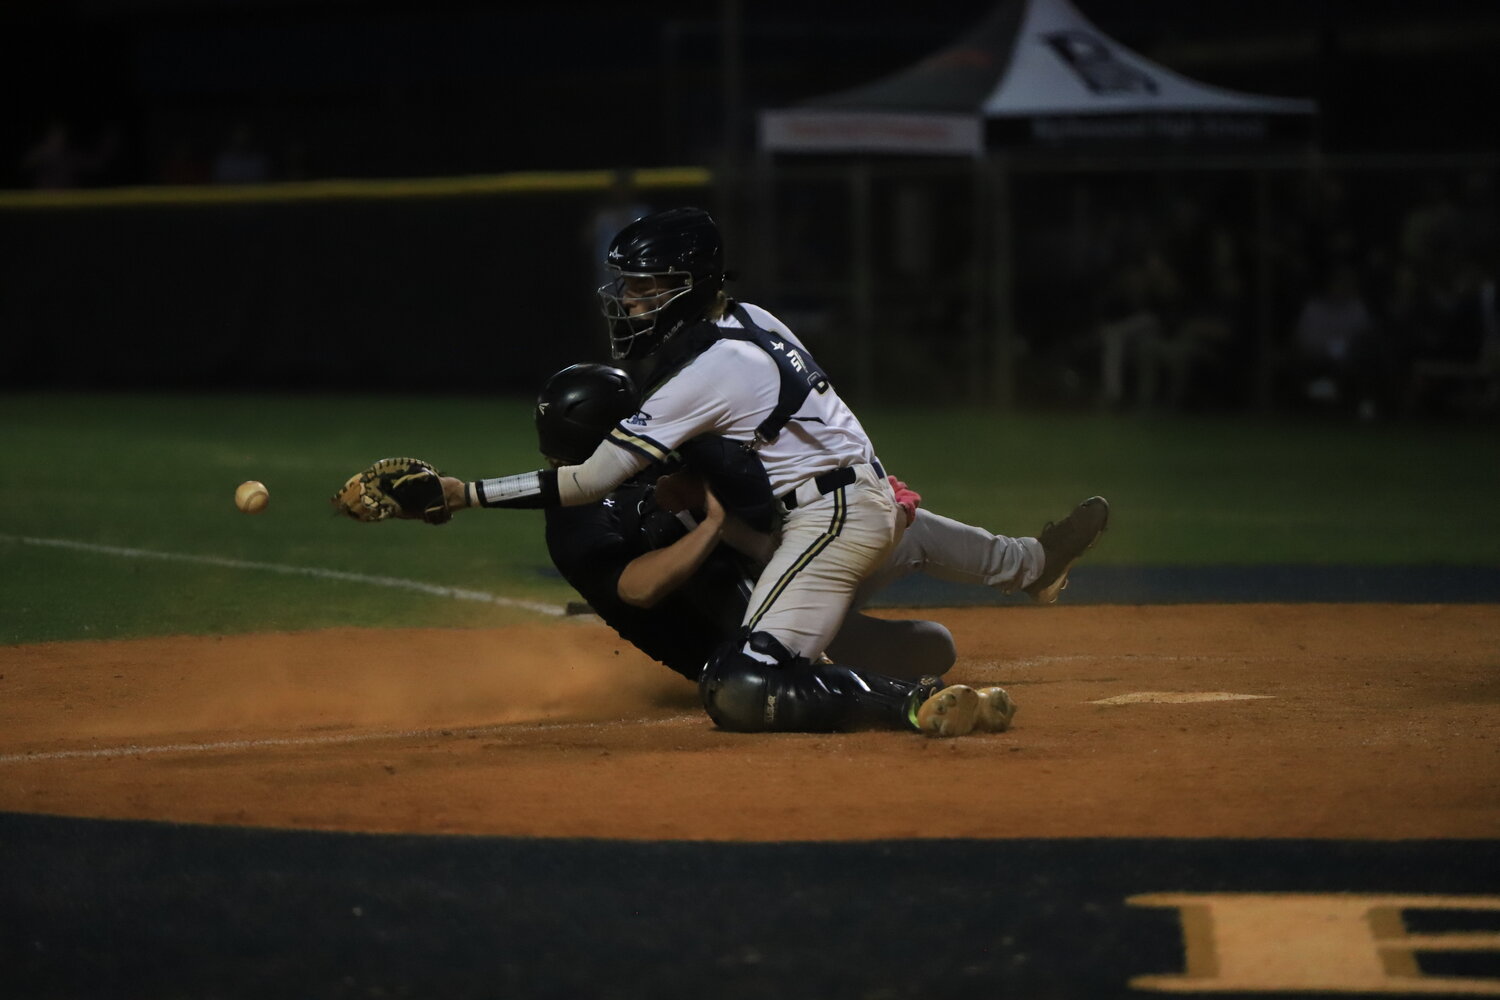 Coleman Szuhy slides underneath the Blythewood catcher to give the Gators a 9-7 lead in the top of the seventh inning.